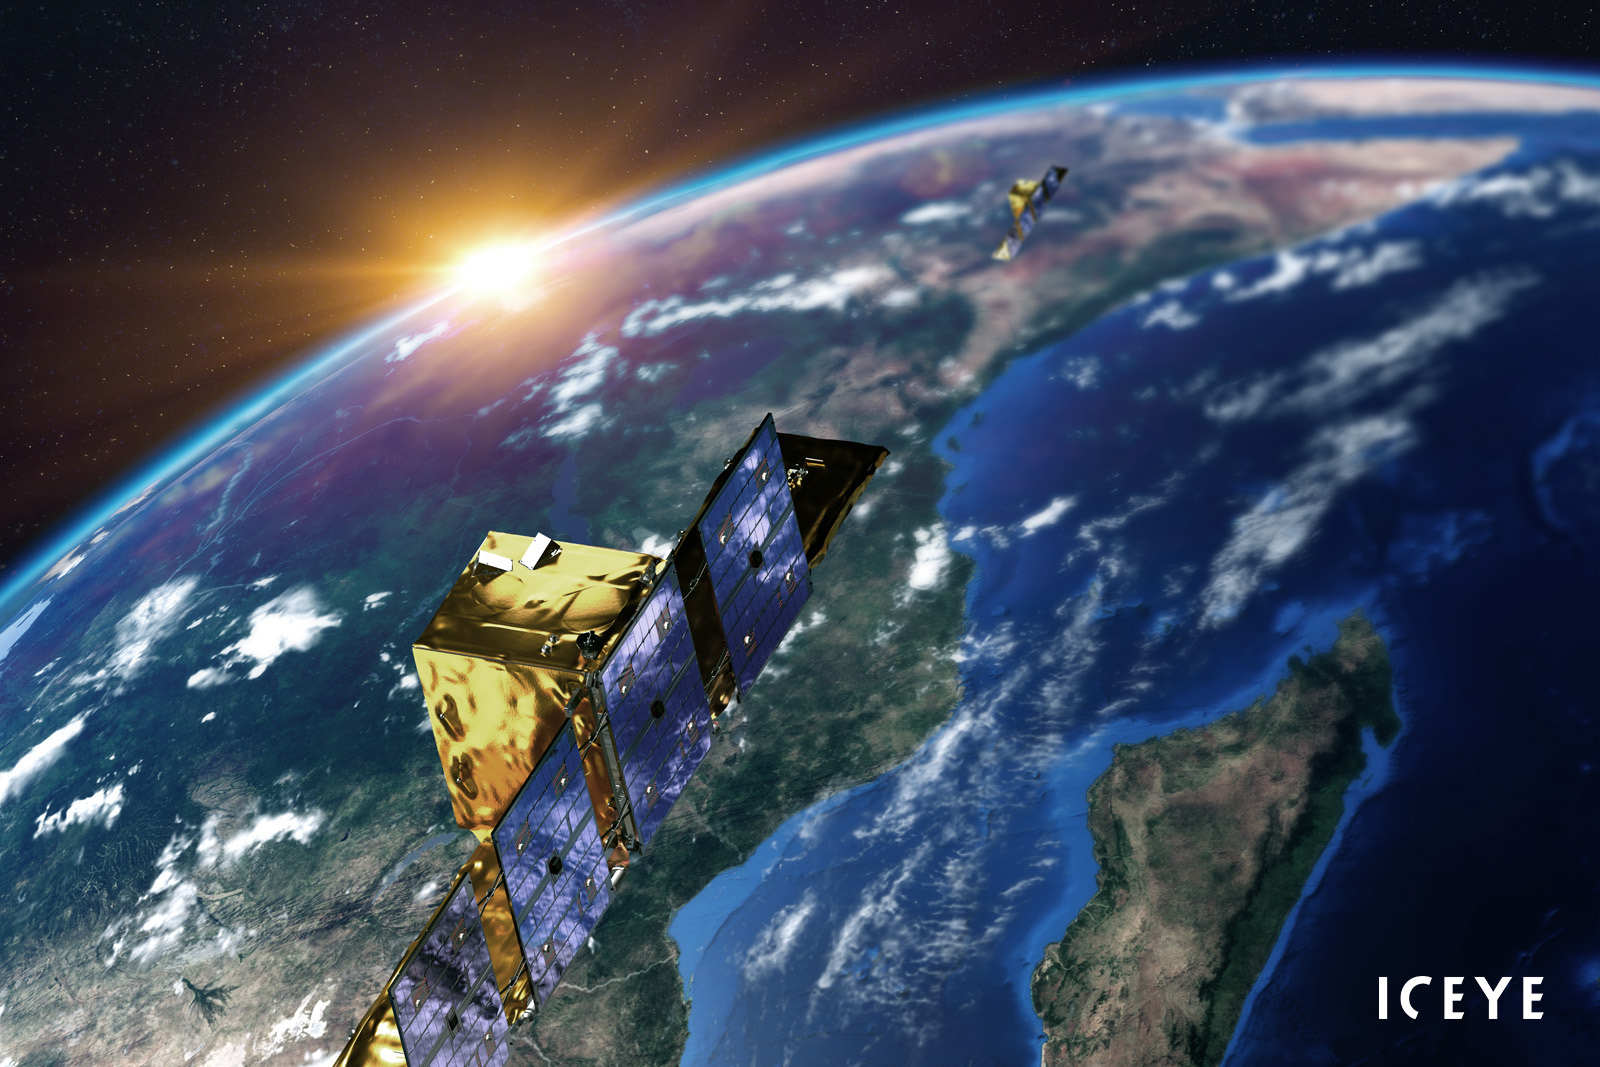 USD 87M in Series C for ICEYE to Continue Conquering Boundaries in Radar Satellite Imaging